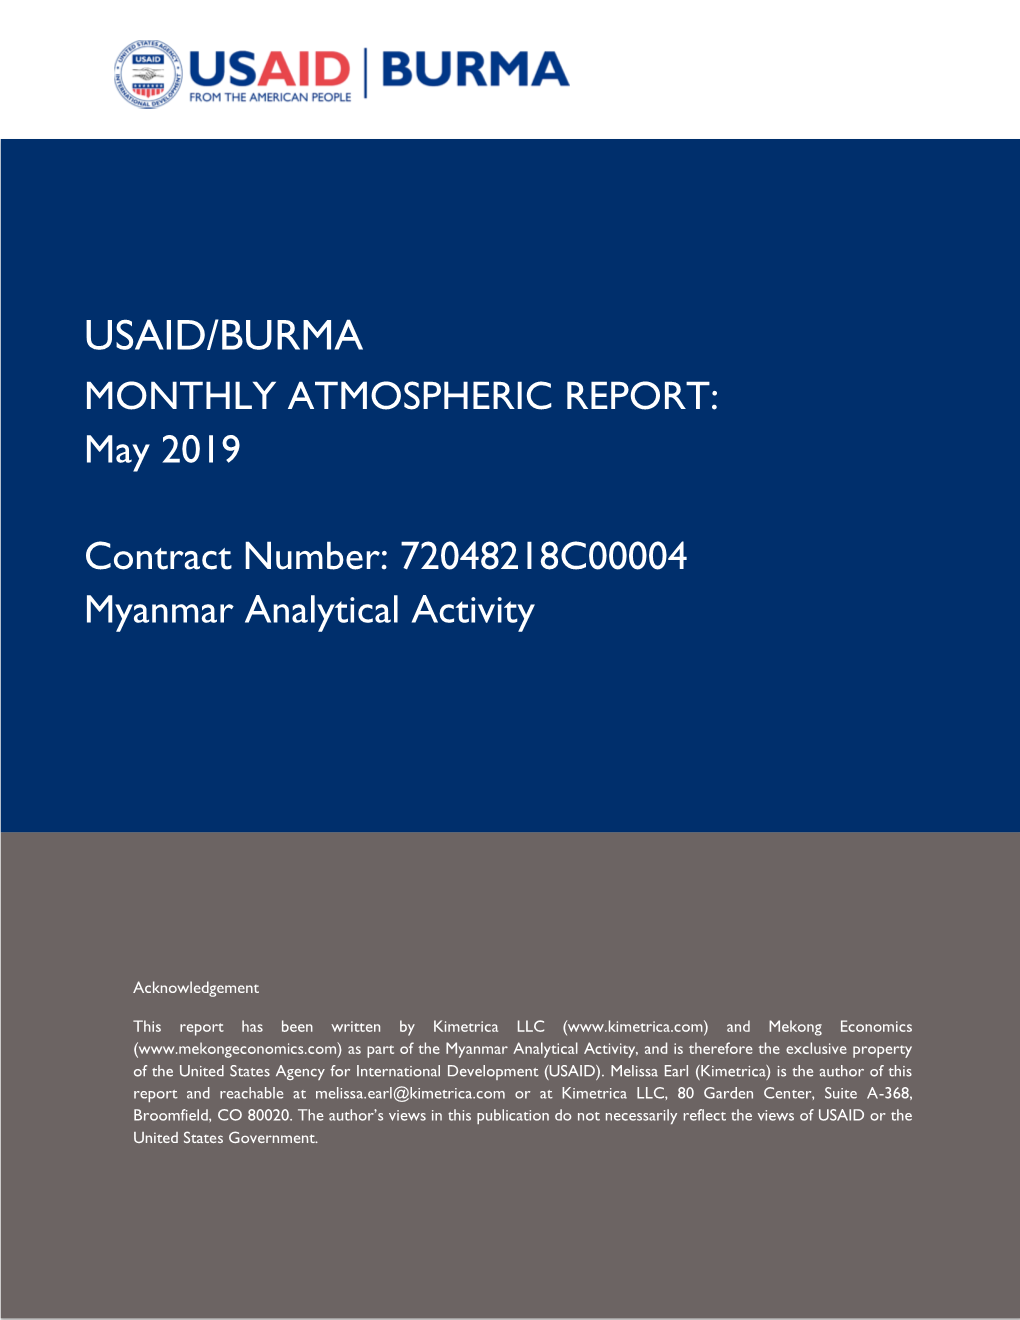 USAID/BURMA MONTHLY ATMOSPHERIC REPORT: May 2019